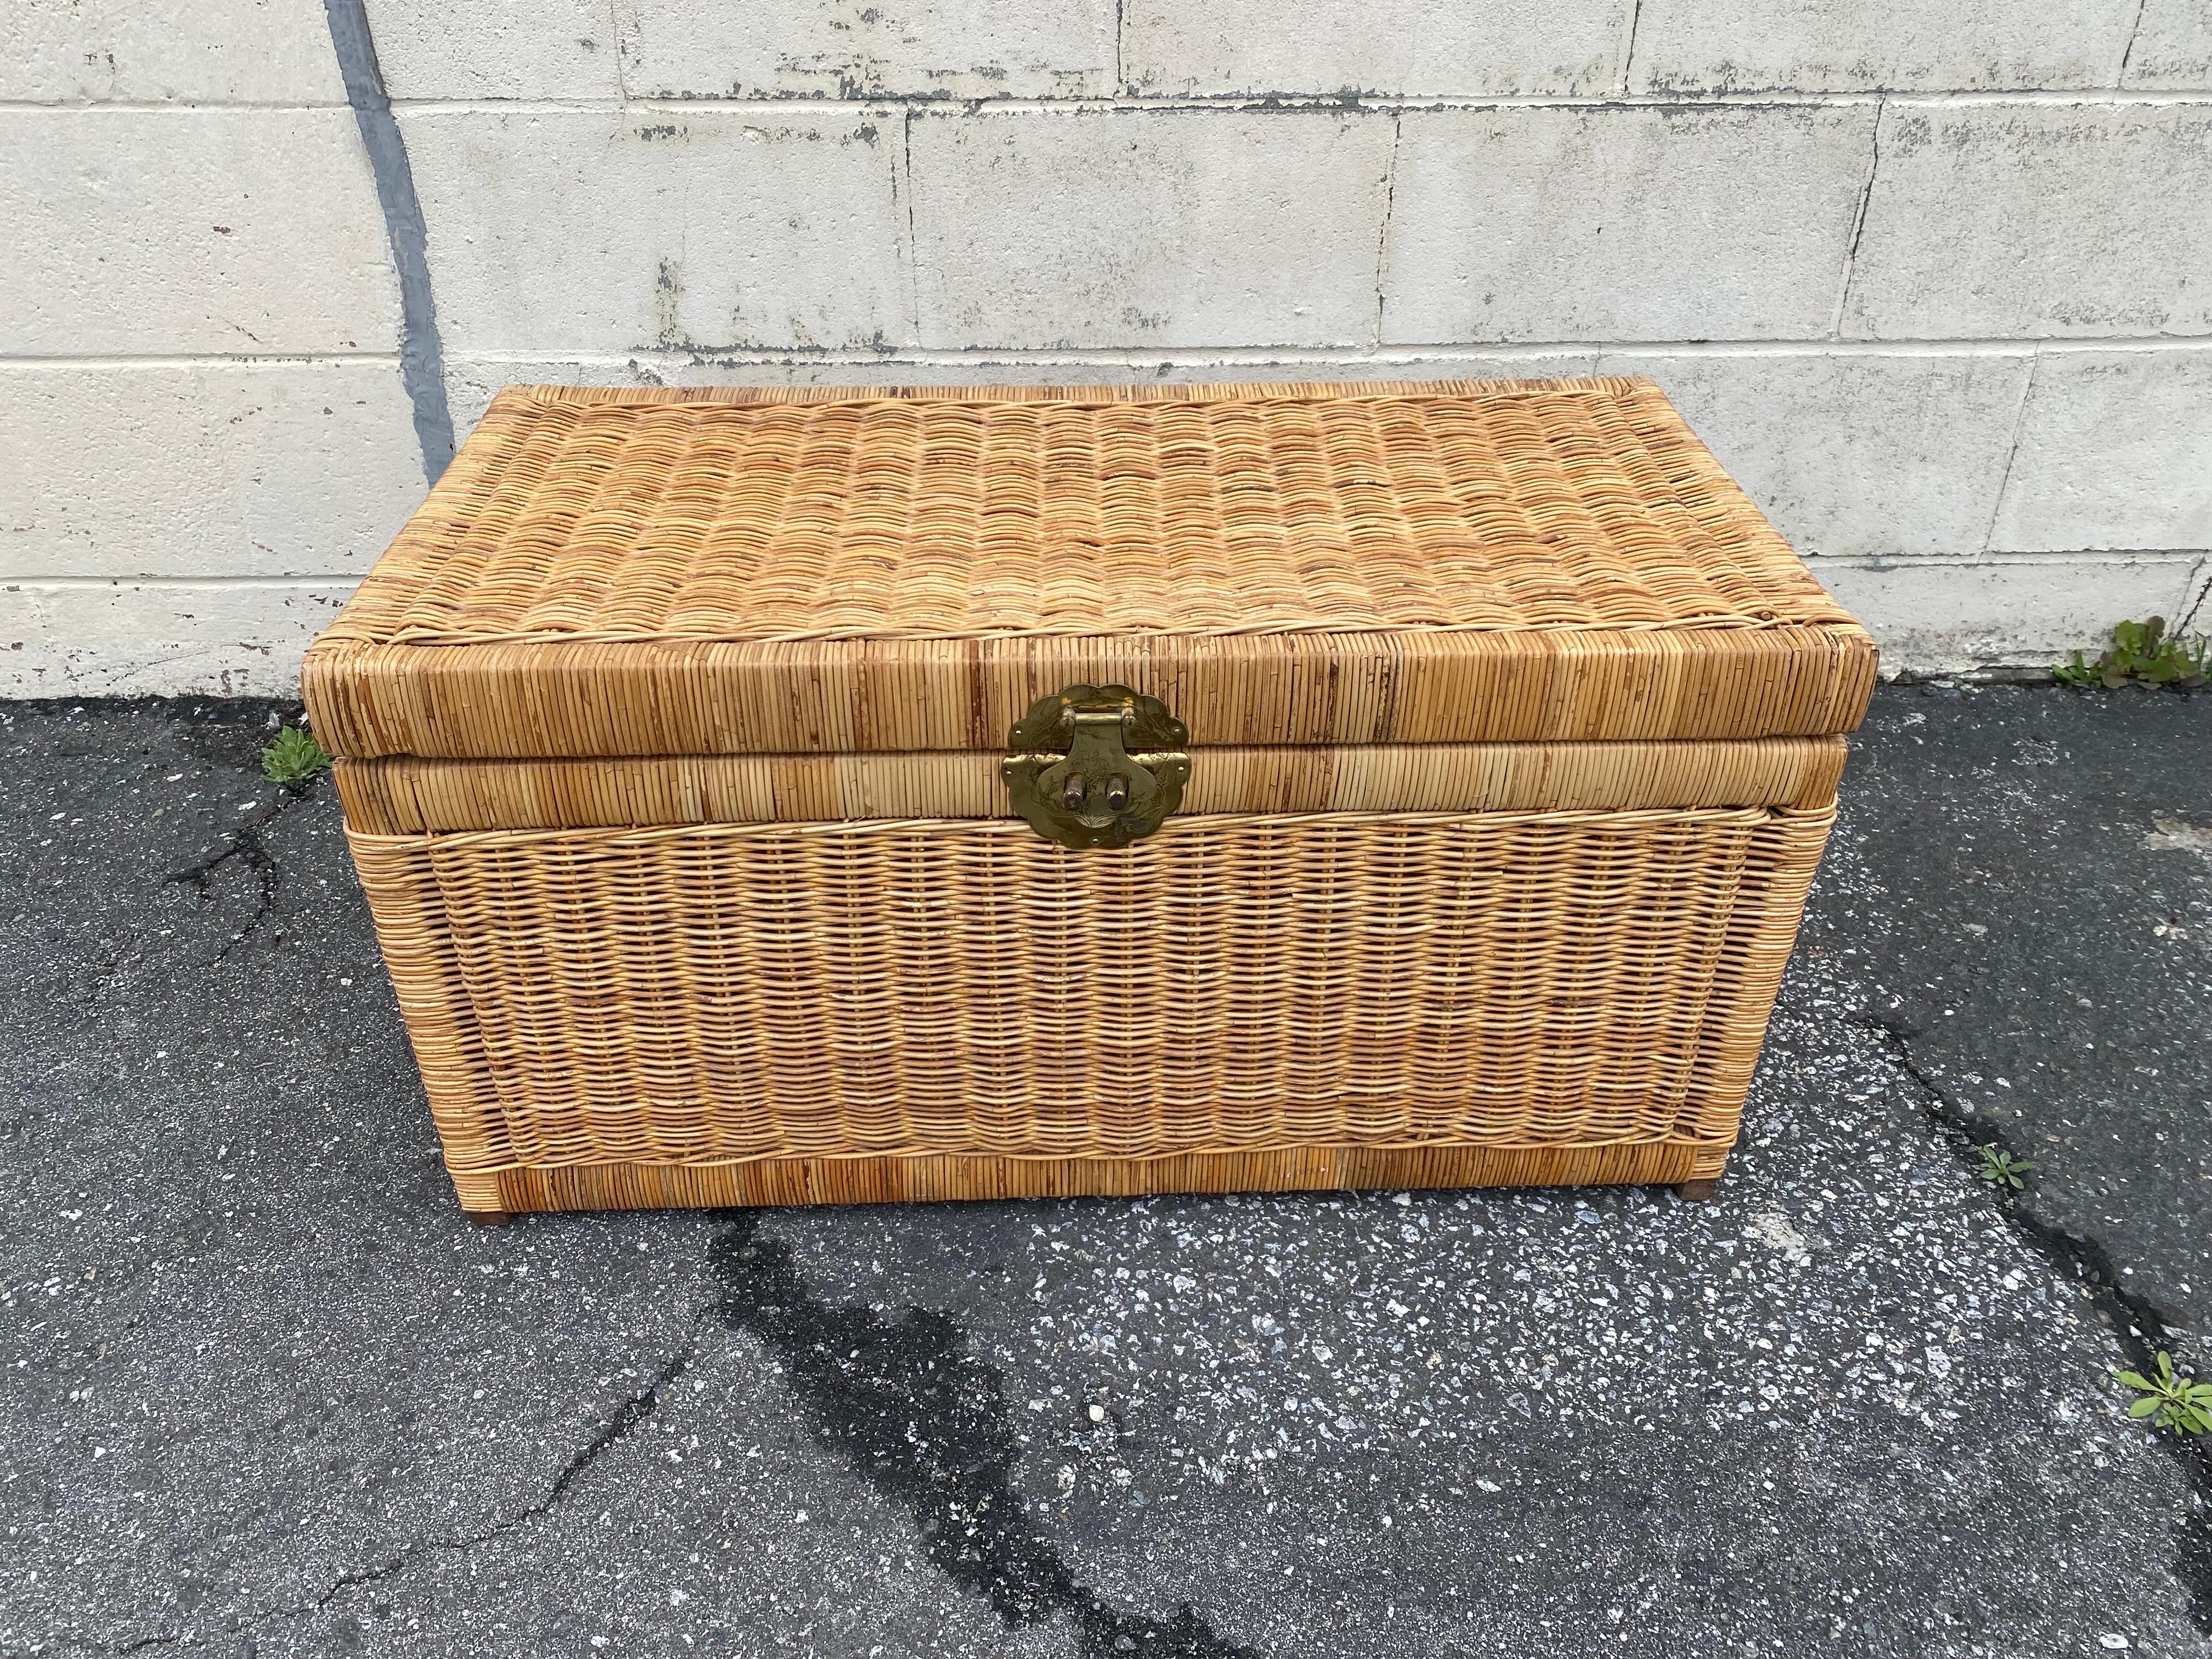 Beautiful vintage handwoven wicker rattan storage chest for blankets or the store anything you want to help save space and de-clutter. Made in the middle of the twentieth century this chest comes complete with brass hardware, adorned with birds and